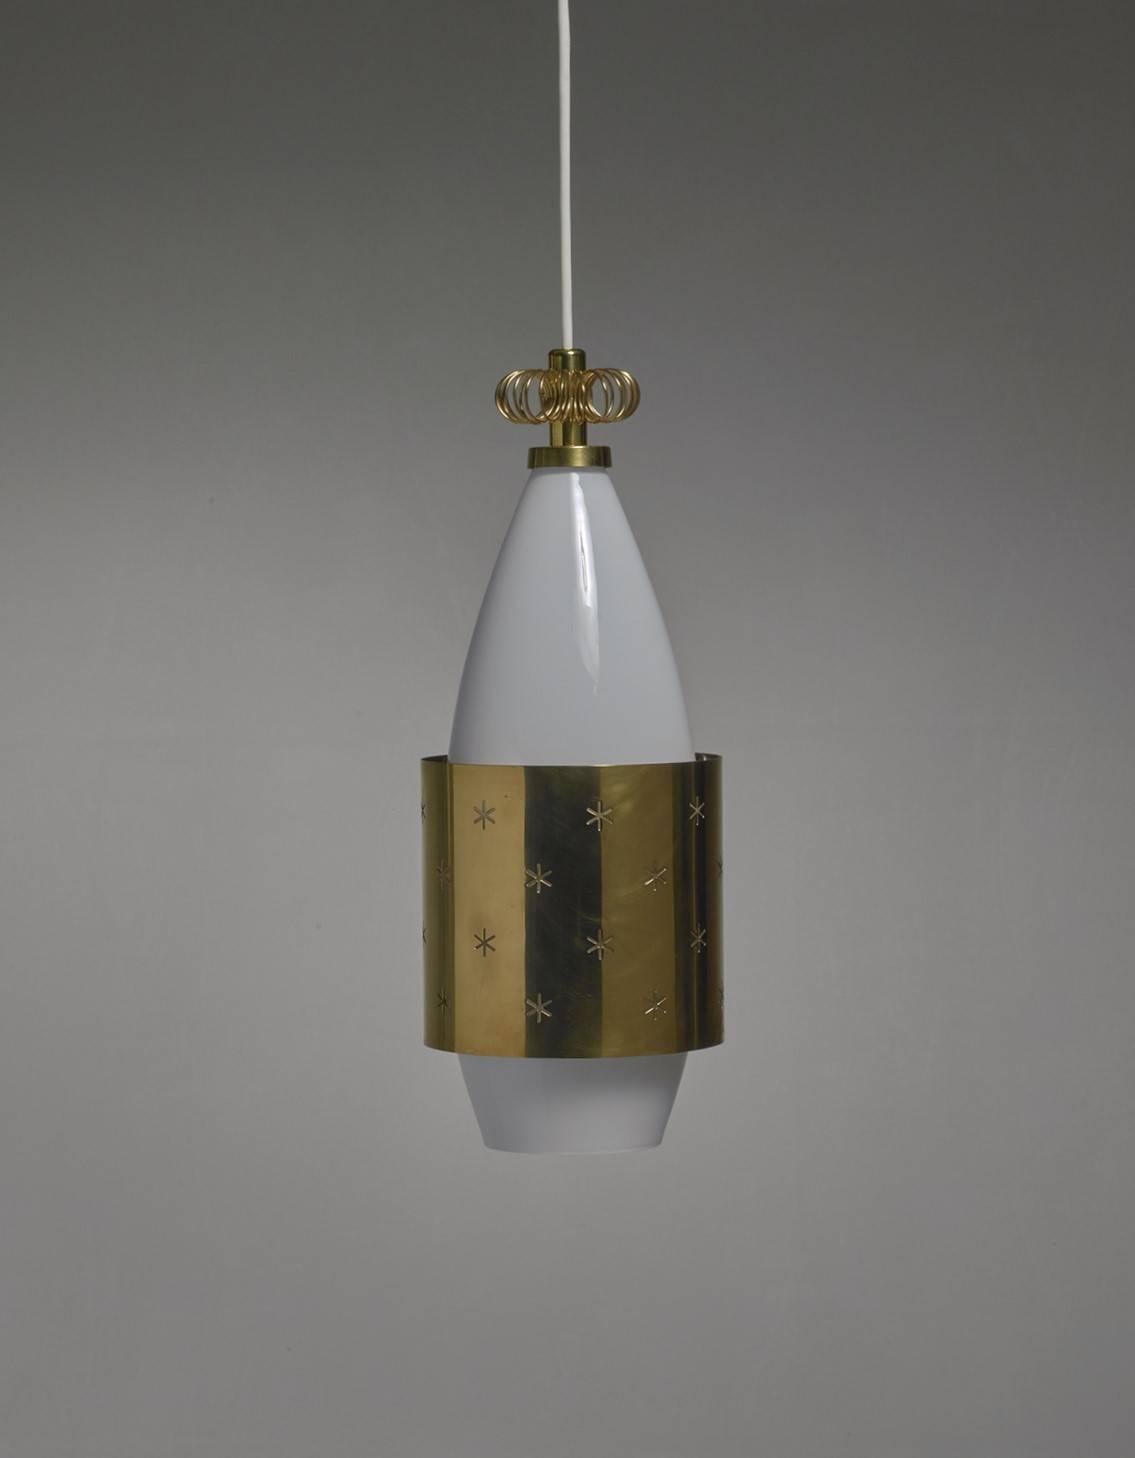 A rare model K2-12 pendant by Paavo Tynell for Idman. The lamp is made of an opaline glass diffuser and a brass shade and crown. The shade has star-shaped perforations.